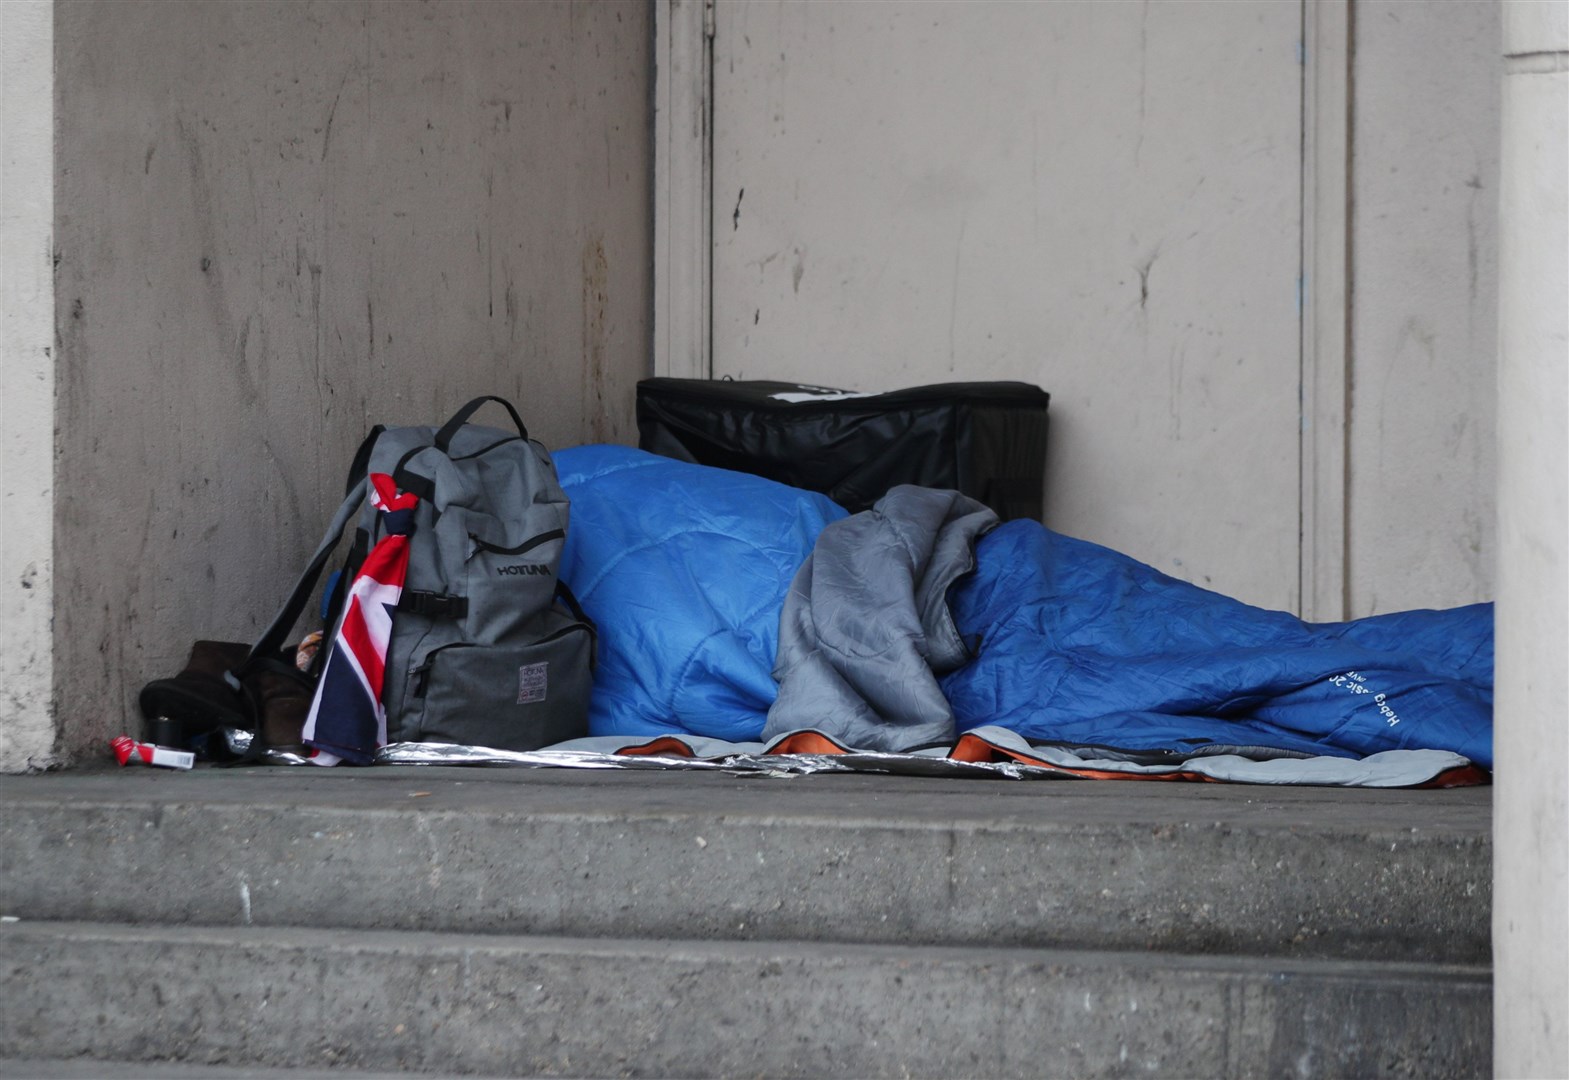 A homeless person sleeping rough in a doorway (PA)